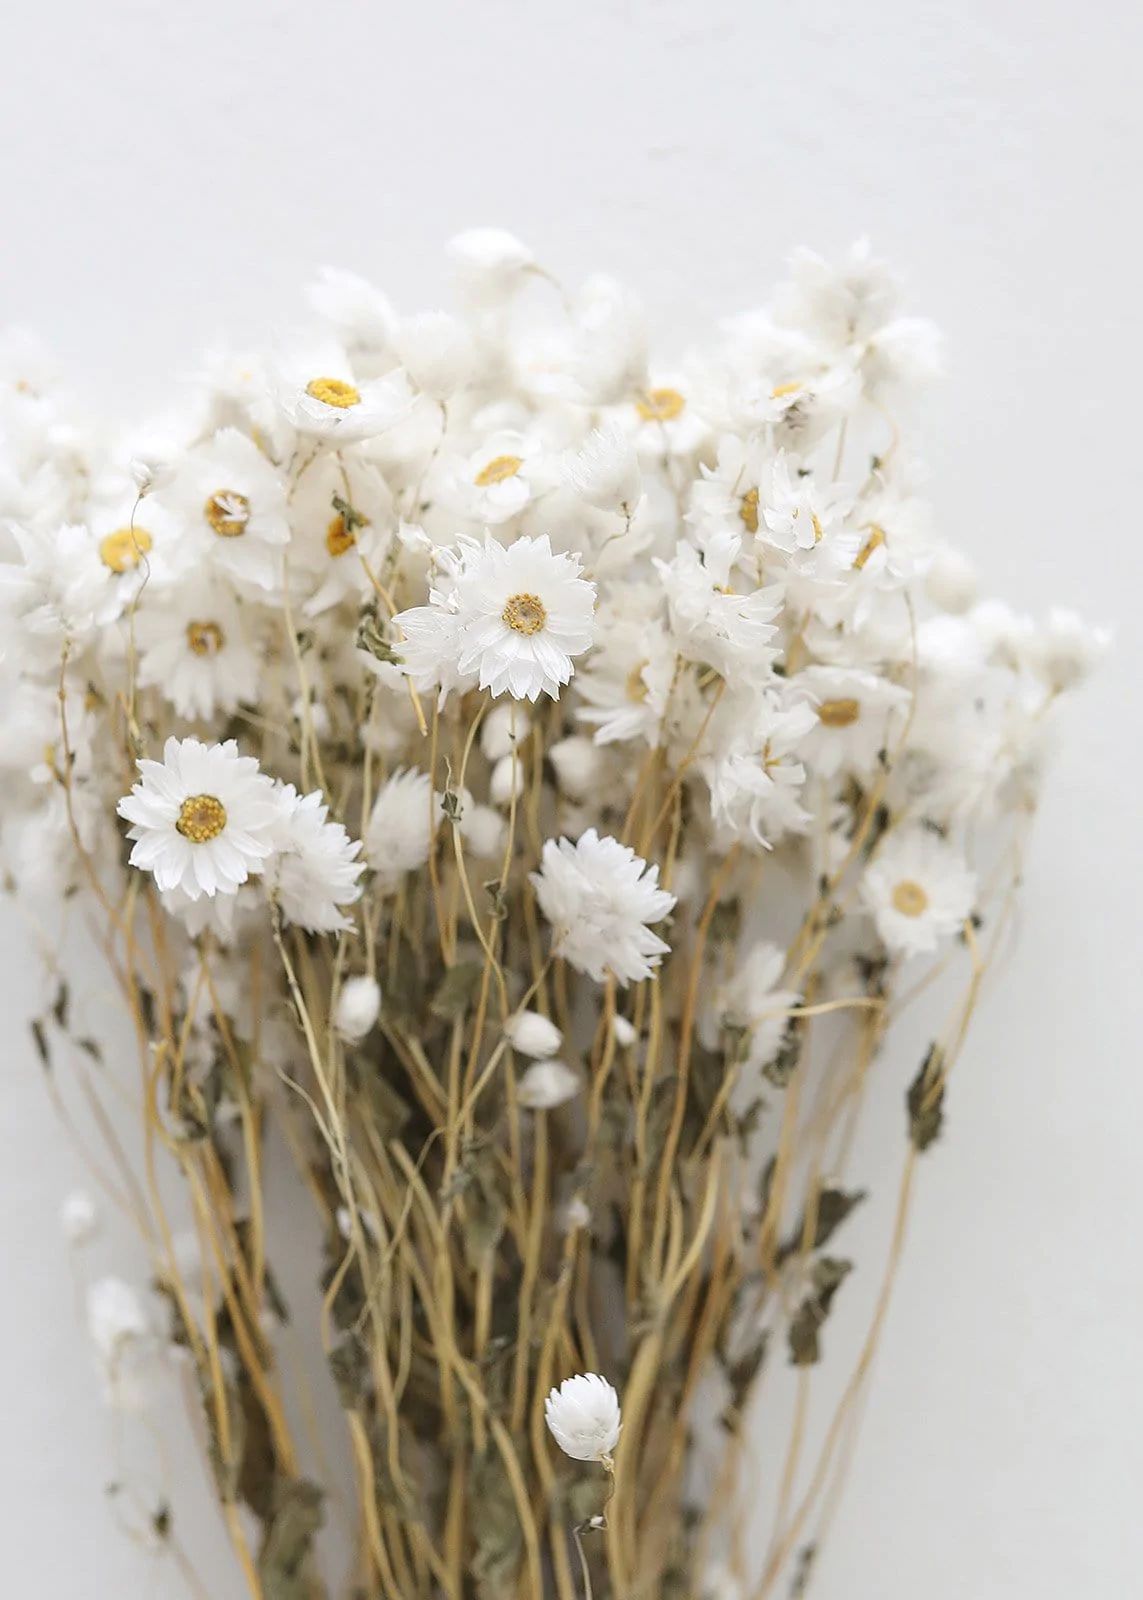 Preserved Rodanthe in White | Shop Dried Flowers at Afloral.com | Afloral